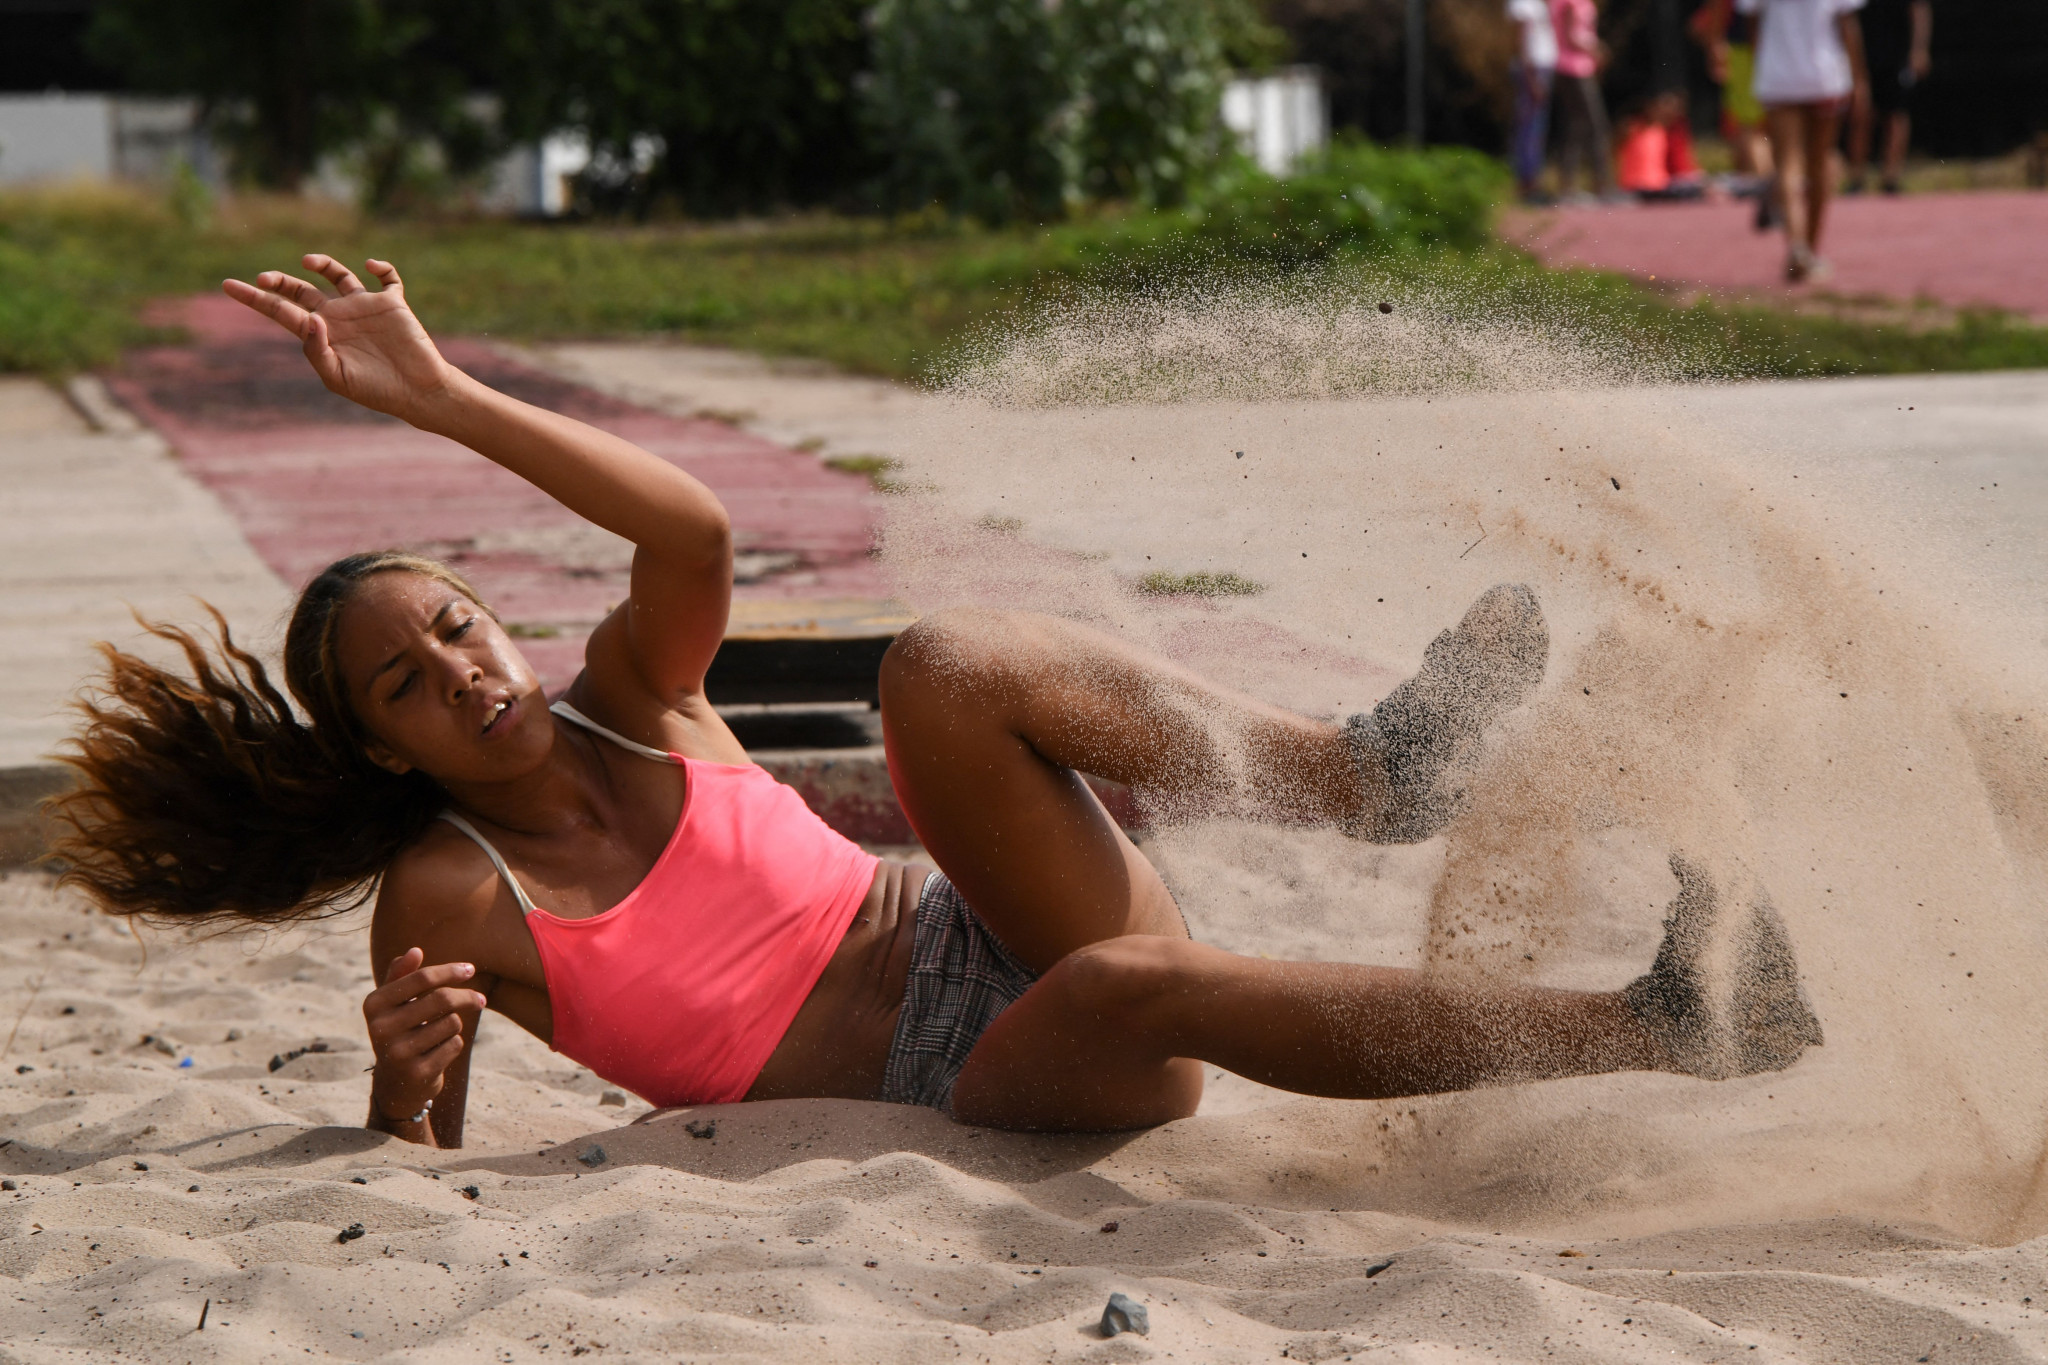 Venezuela's Yulimar Rojas will miss the long jump at this month's World Athletics Championships in Eugene after her qualifying mark was ruled out ©Getty Images 